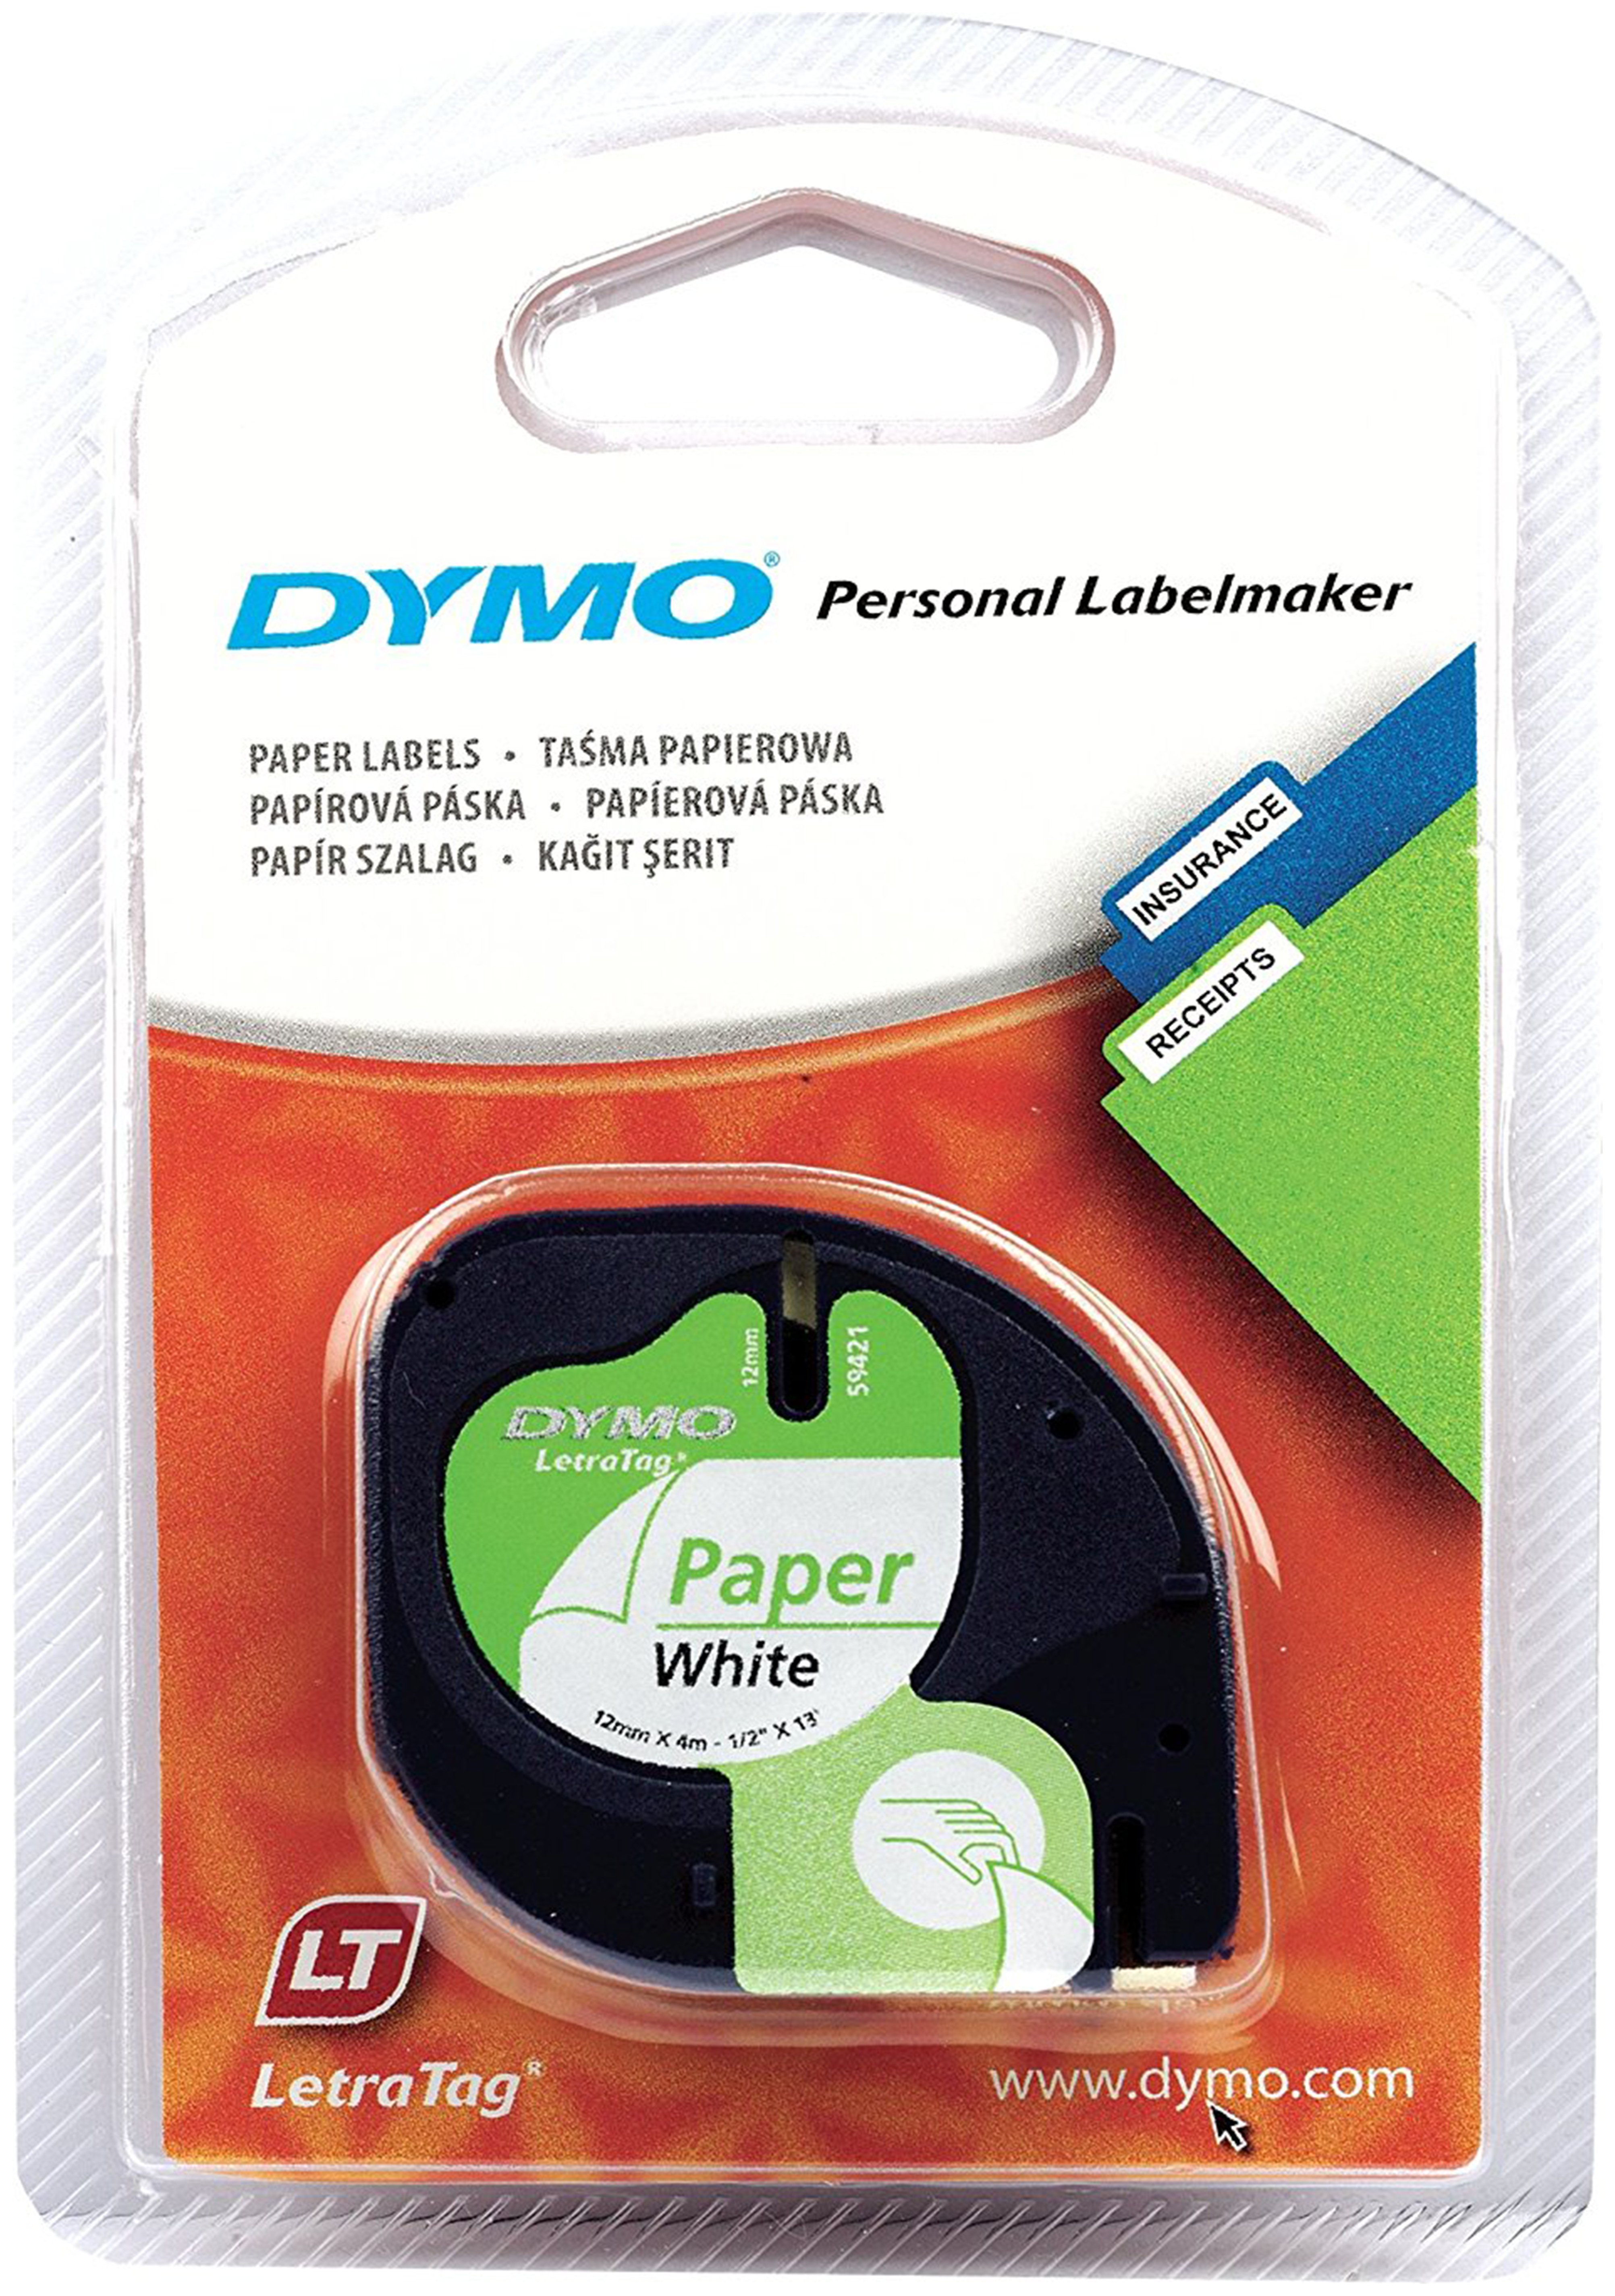 DYMO LetraTag Tape 12mm - Paper/White. Review